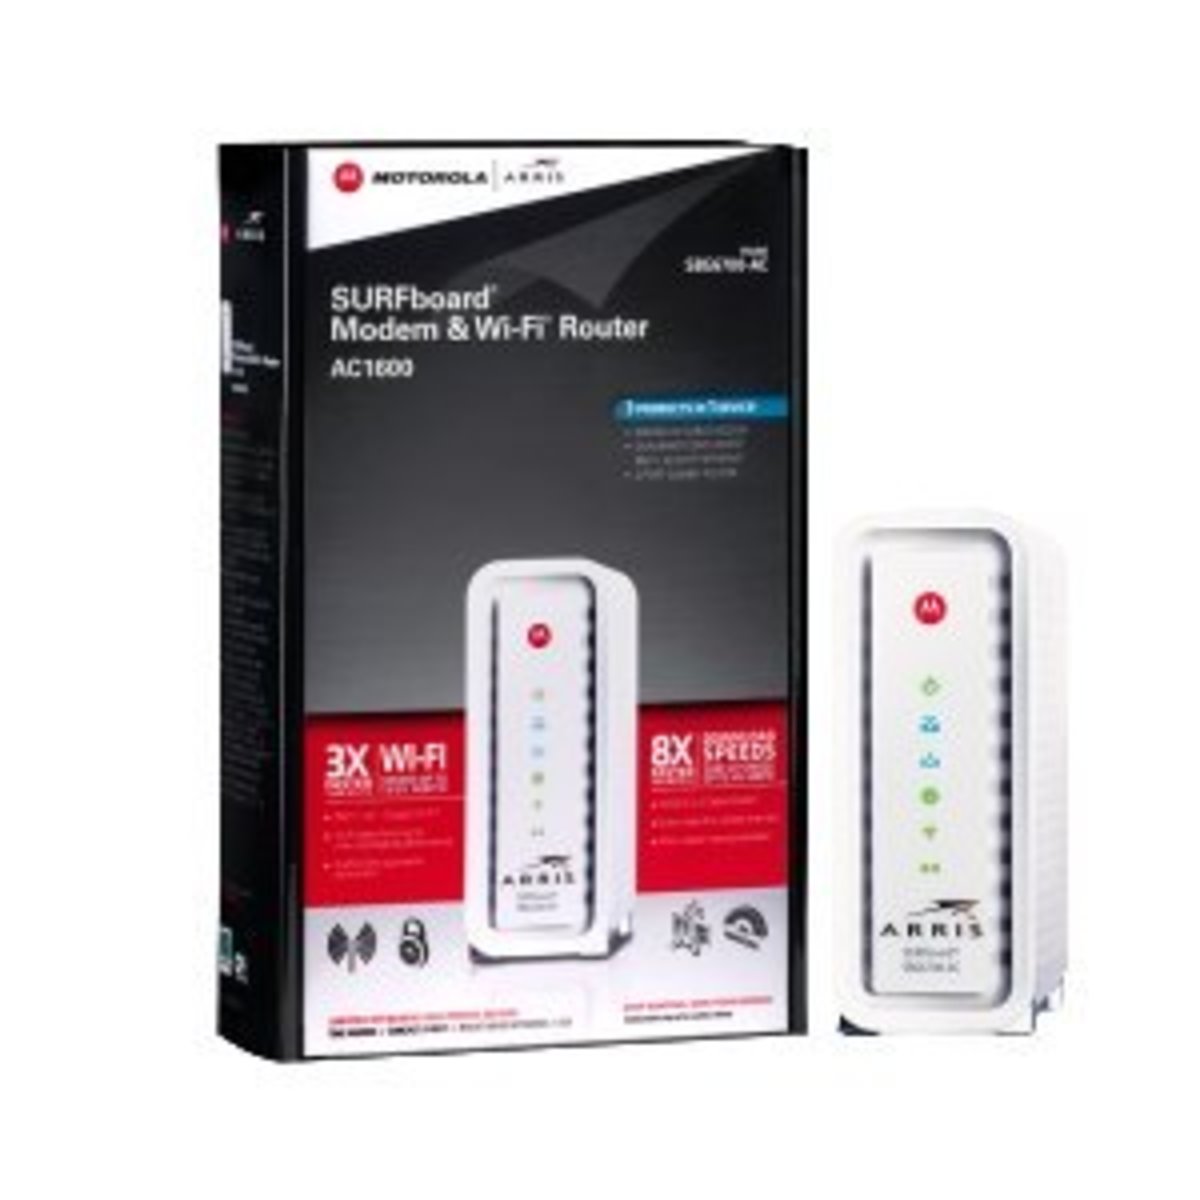 ARRIS / Motorola Surfboard DOCSIS 3.0 Cable Modem with AC1600 WiFi Router (SBG6700AC)